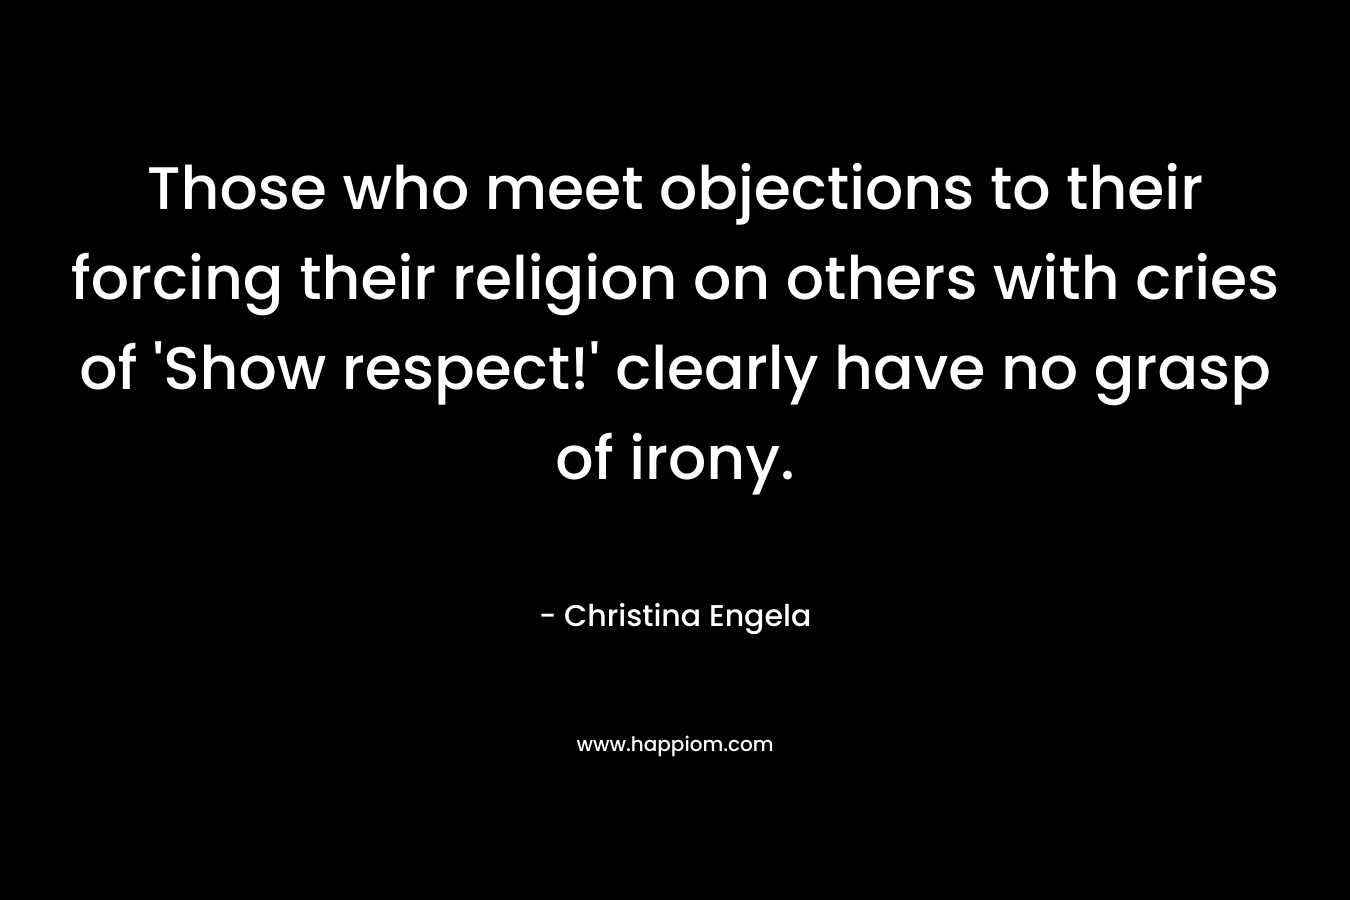 Those who meet objections to their forcing their religion on others with cries of 'Show respect!' clearly have no grasp of irony.